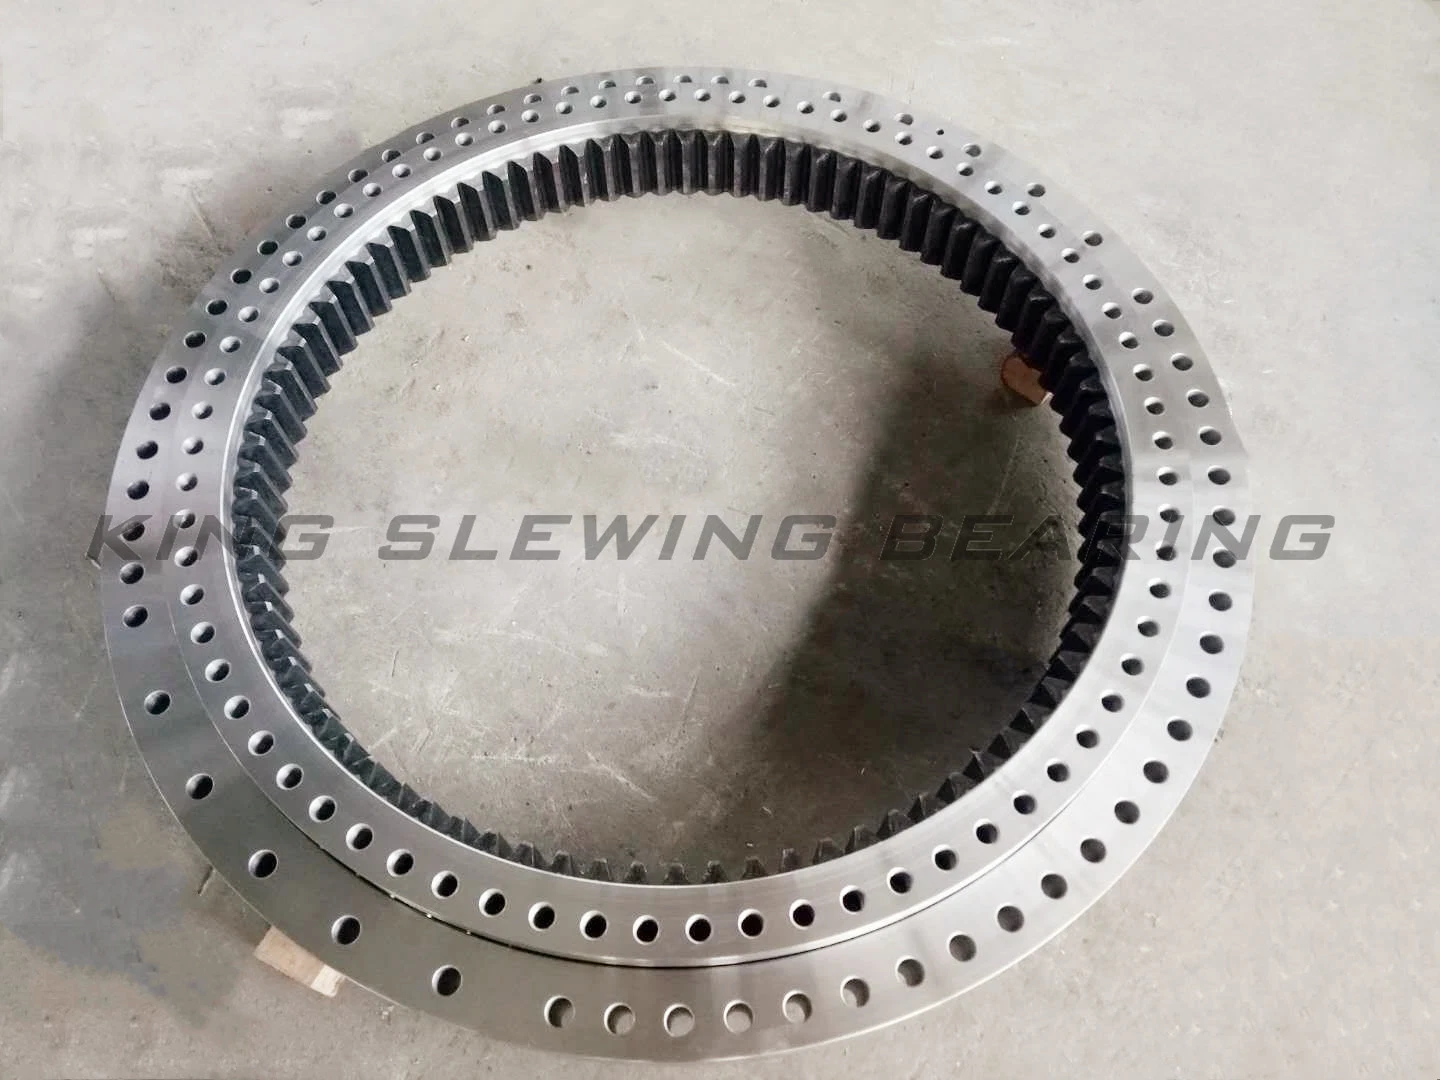 Excavator Parts Slewing Ring Bearing Ec380b Four Point Contact Ball